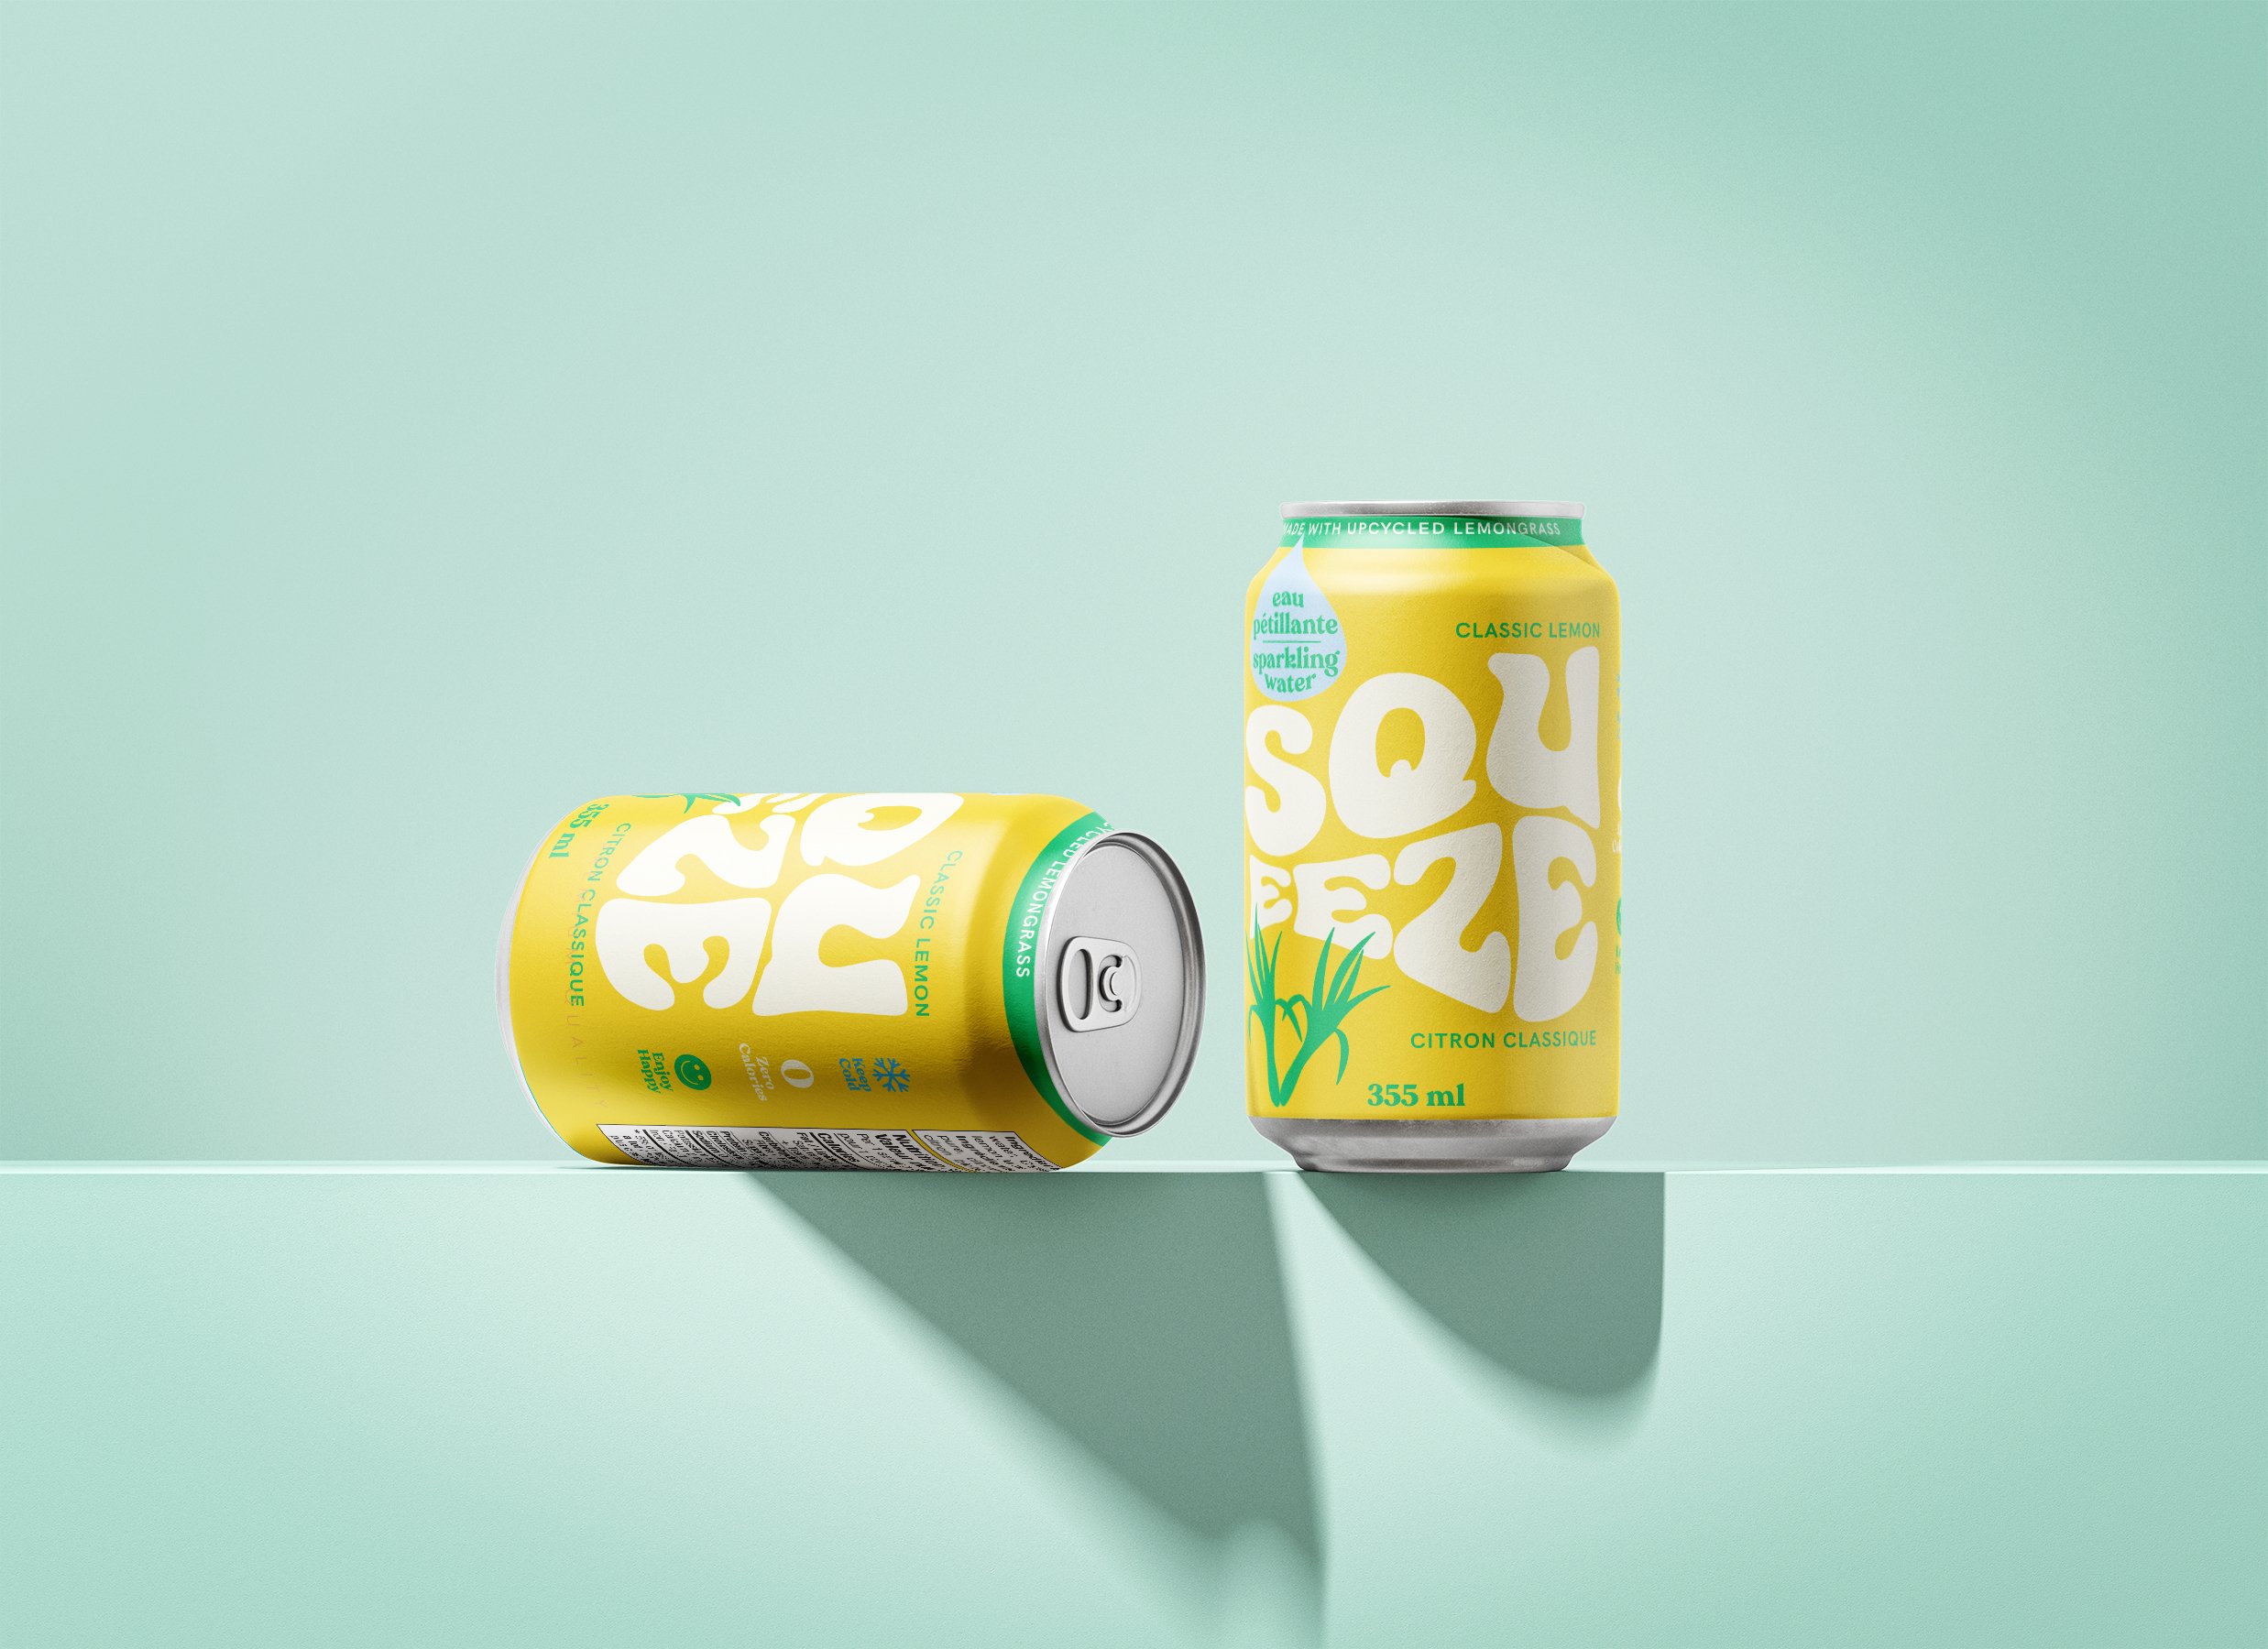 Sparkling Water Packaging Design by Eye Candy Design